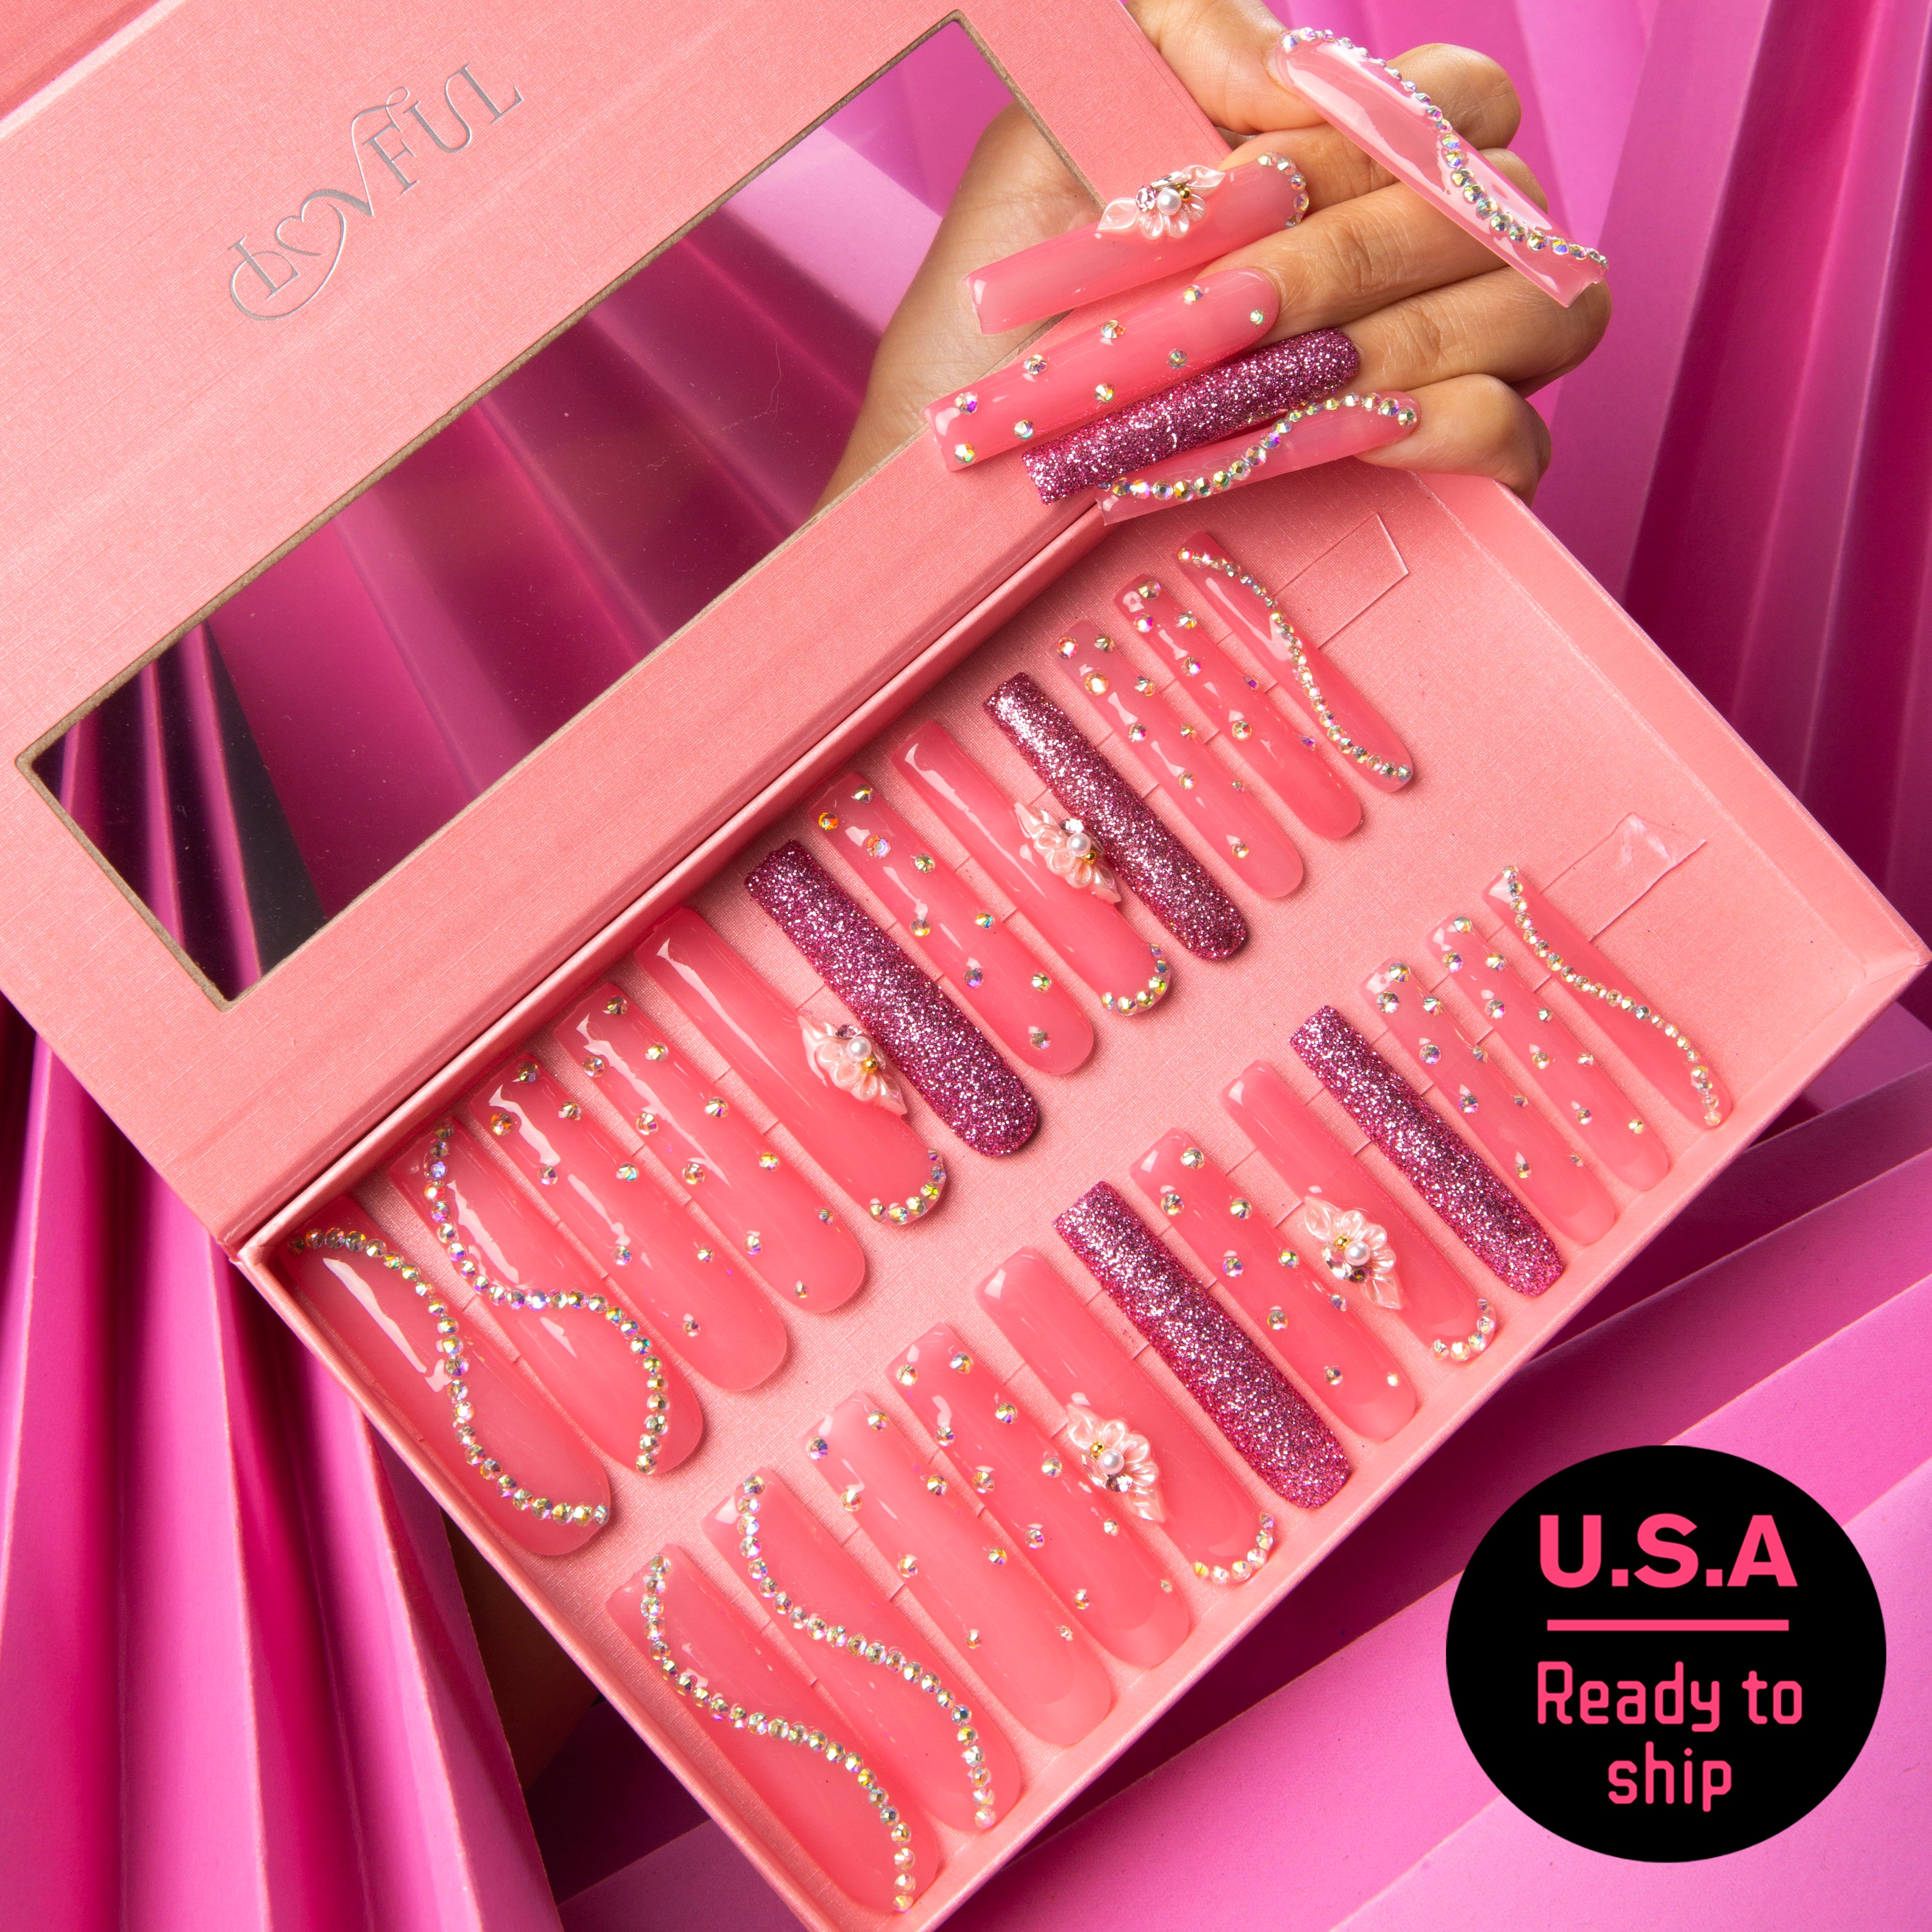 24 hot pink press-on nails with rhinestones, glitter patterns, and dainty flower blossoms in a pink Lovful box. Hand model wearing the nails. U.S.A Ready to ship.